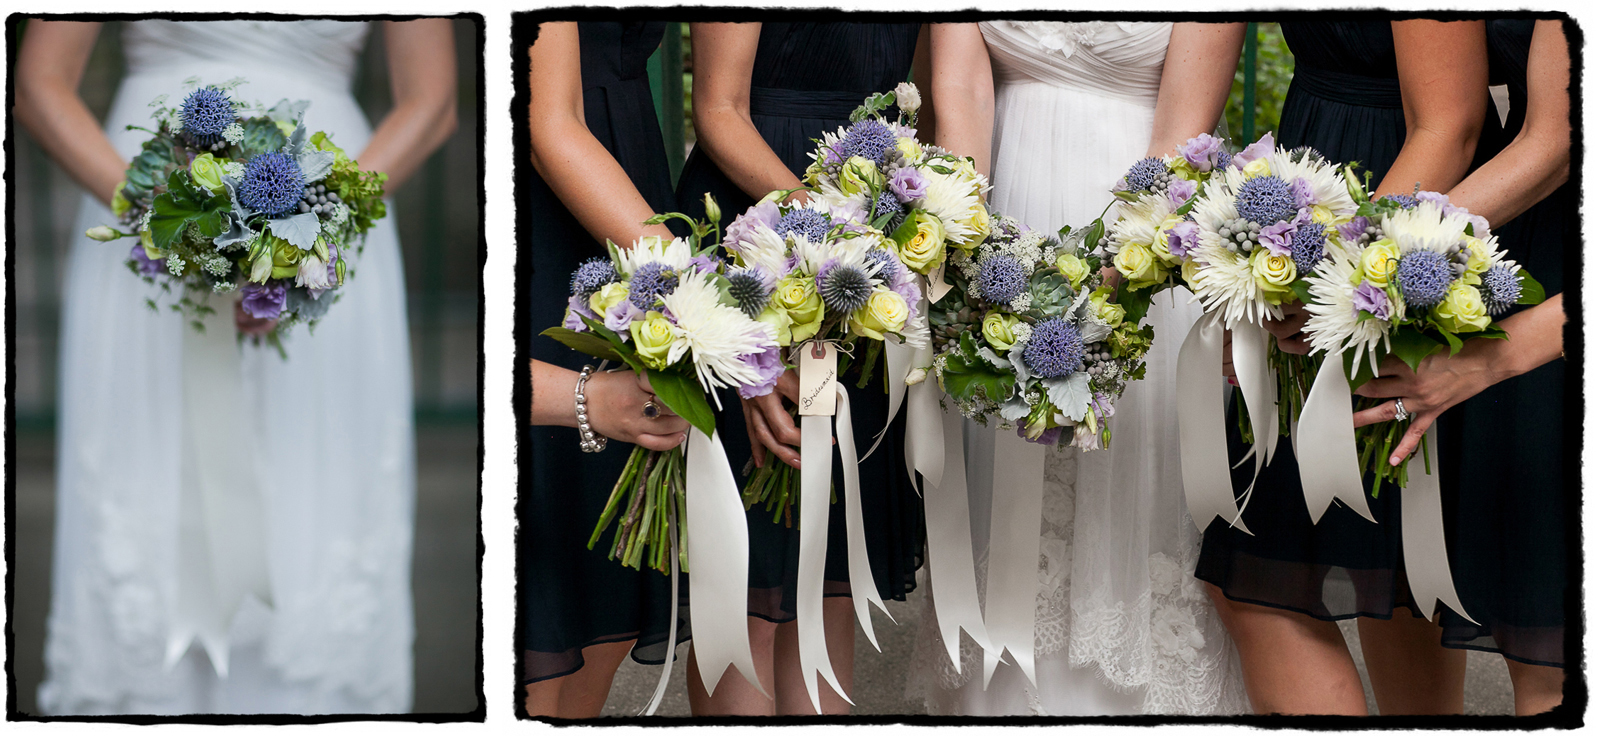 Lauren and her bridesmaids carried bouquets with purple and white flowers for her wedding at Liberty House in Jersey City.